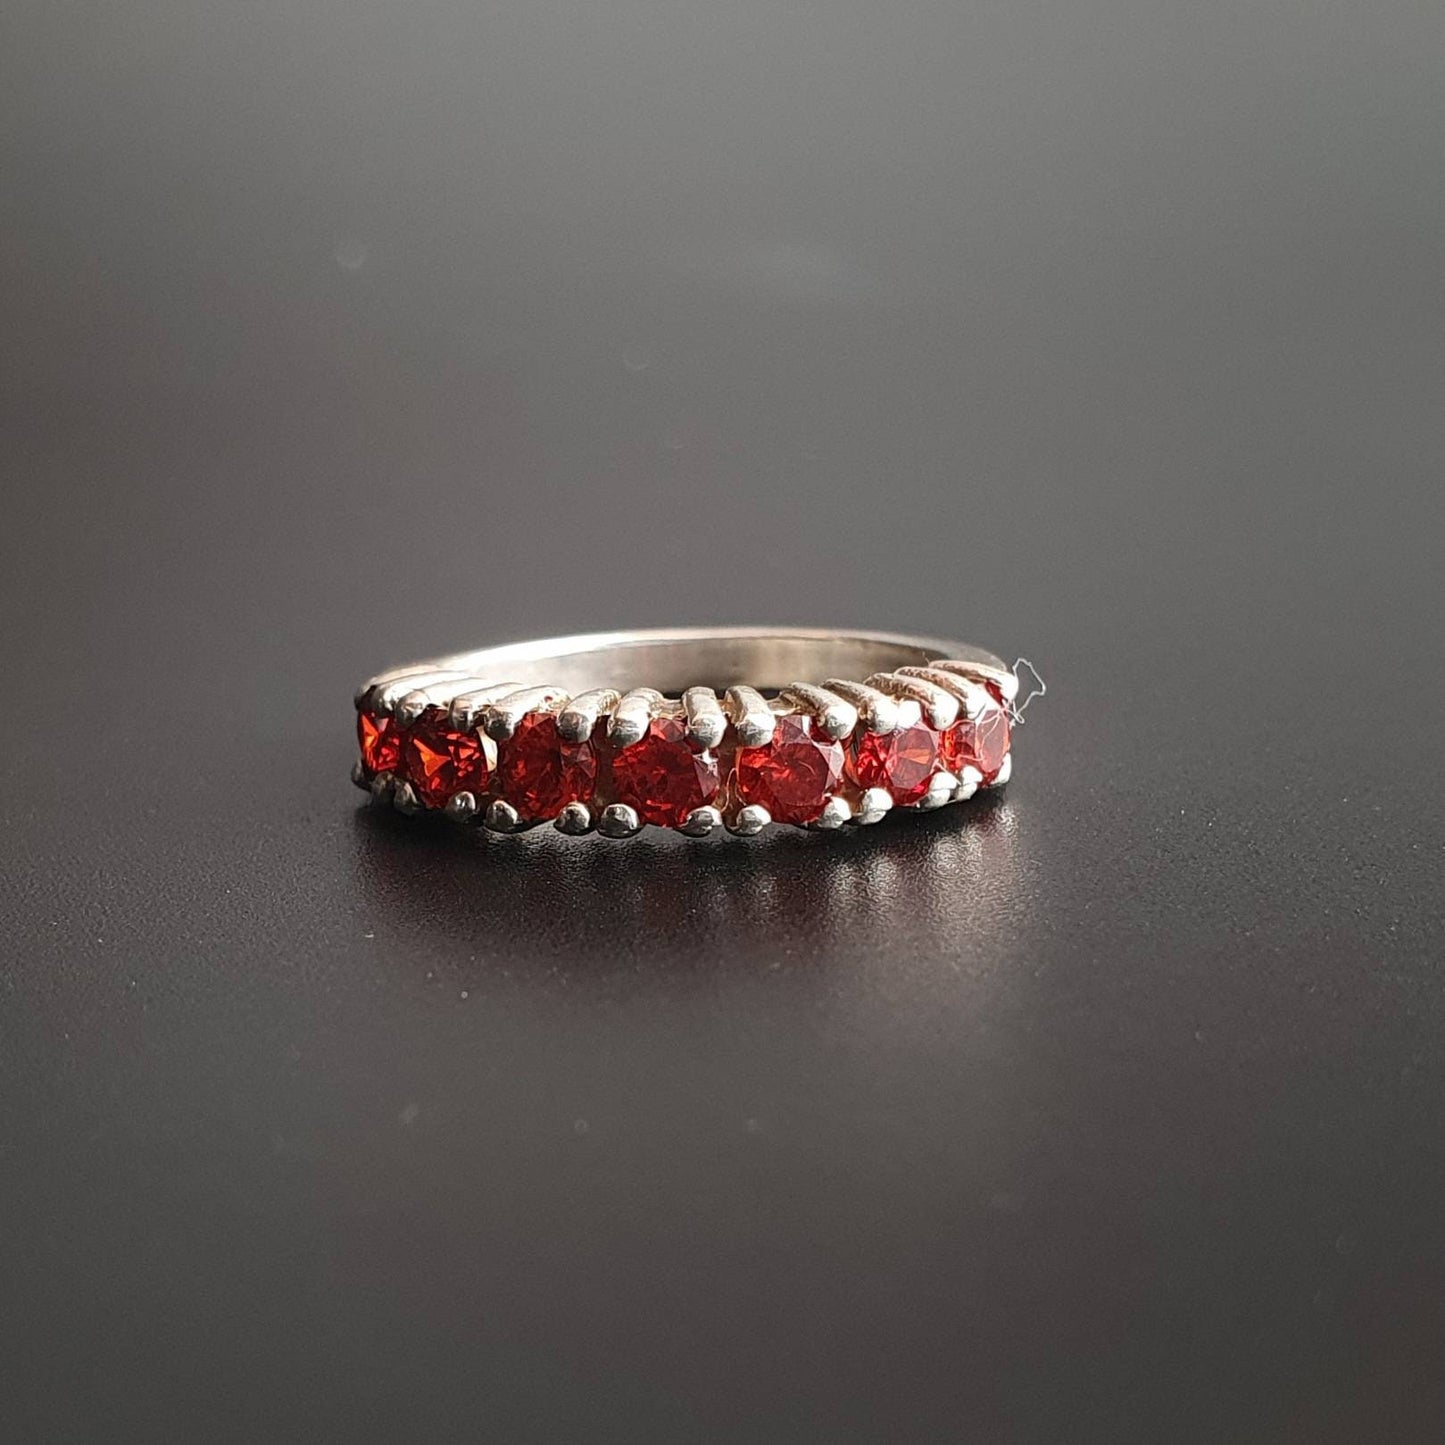 Vintage ring, statement ring, sterling silver ring,love, garnet gemstone, multi stone ring, infinity ring, gifts,red, stackable